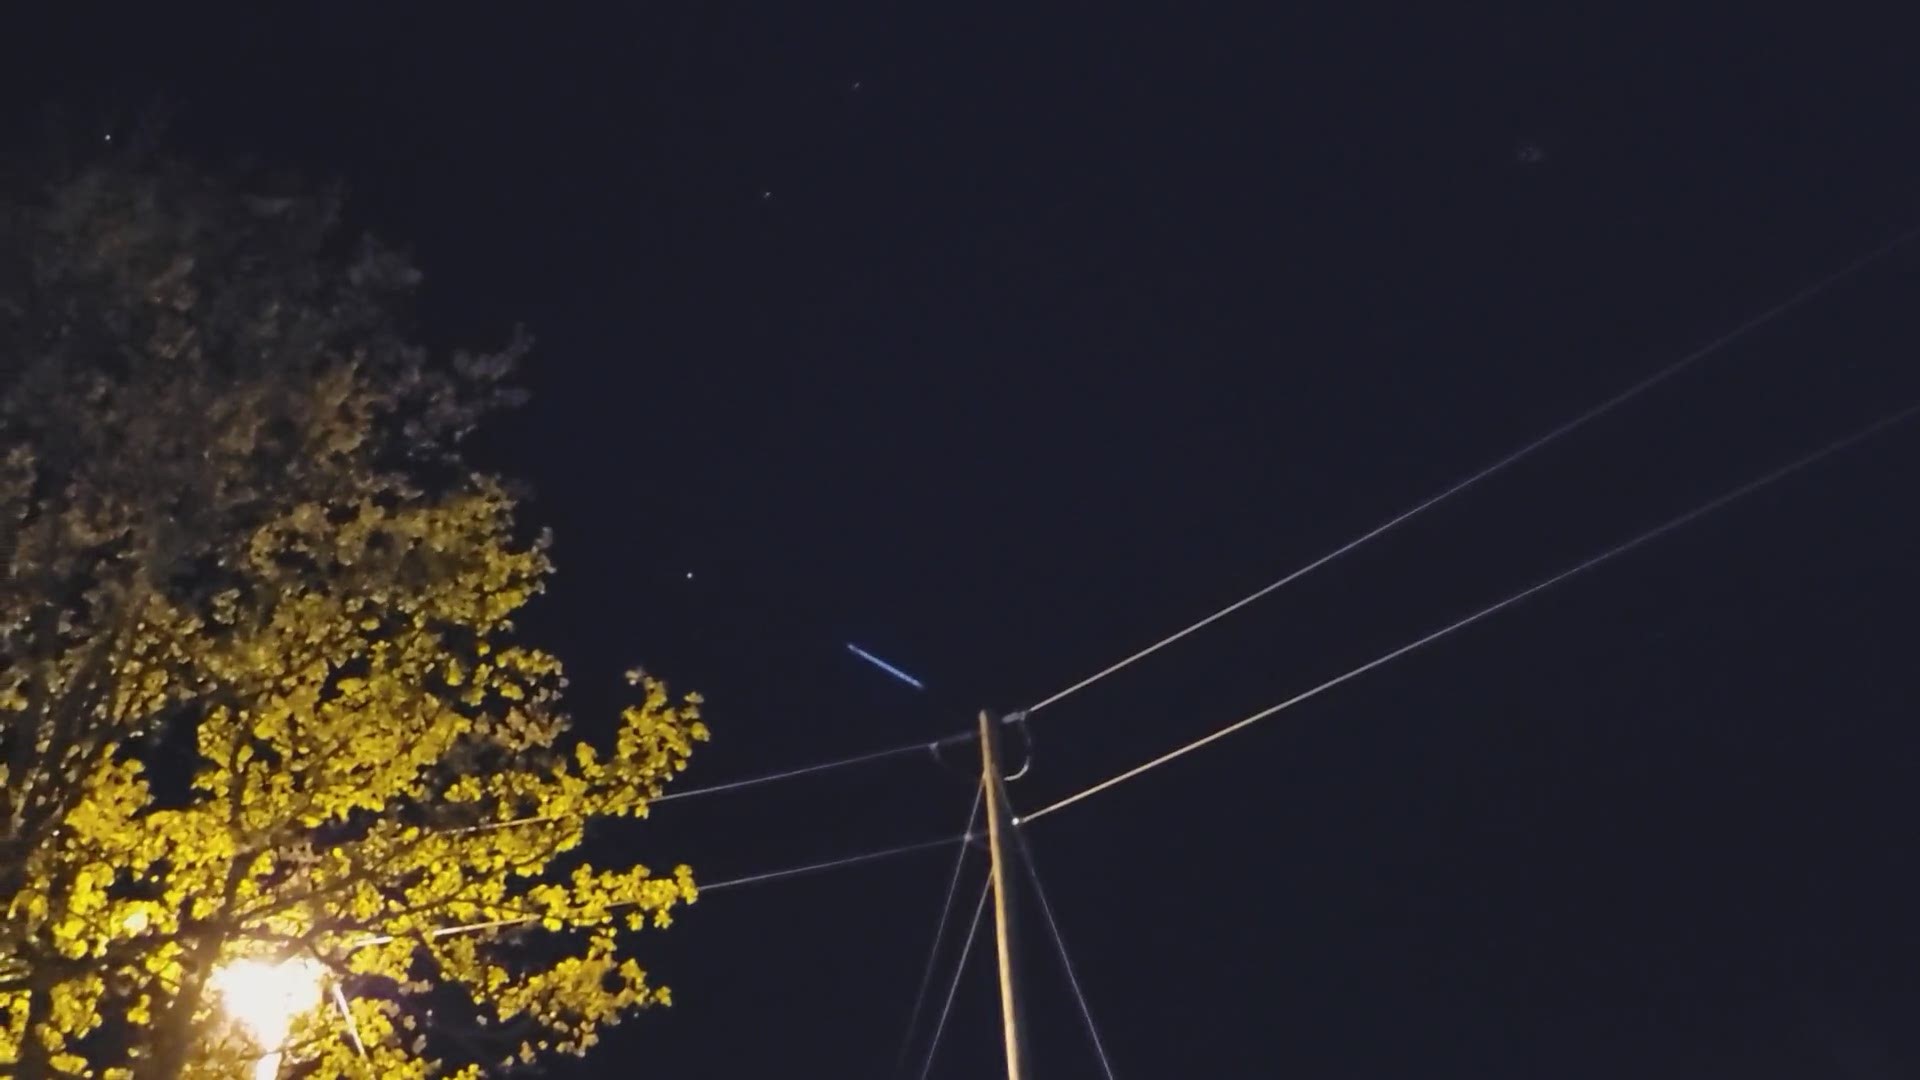 What was this odd string of lights seen over the river valley?
Credit: Matt Perry